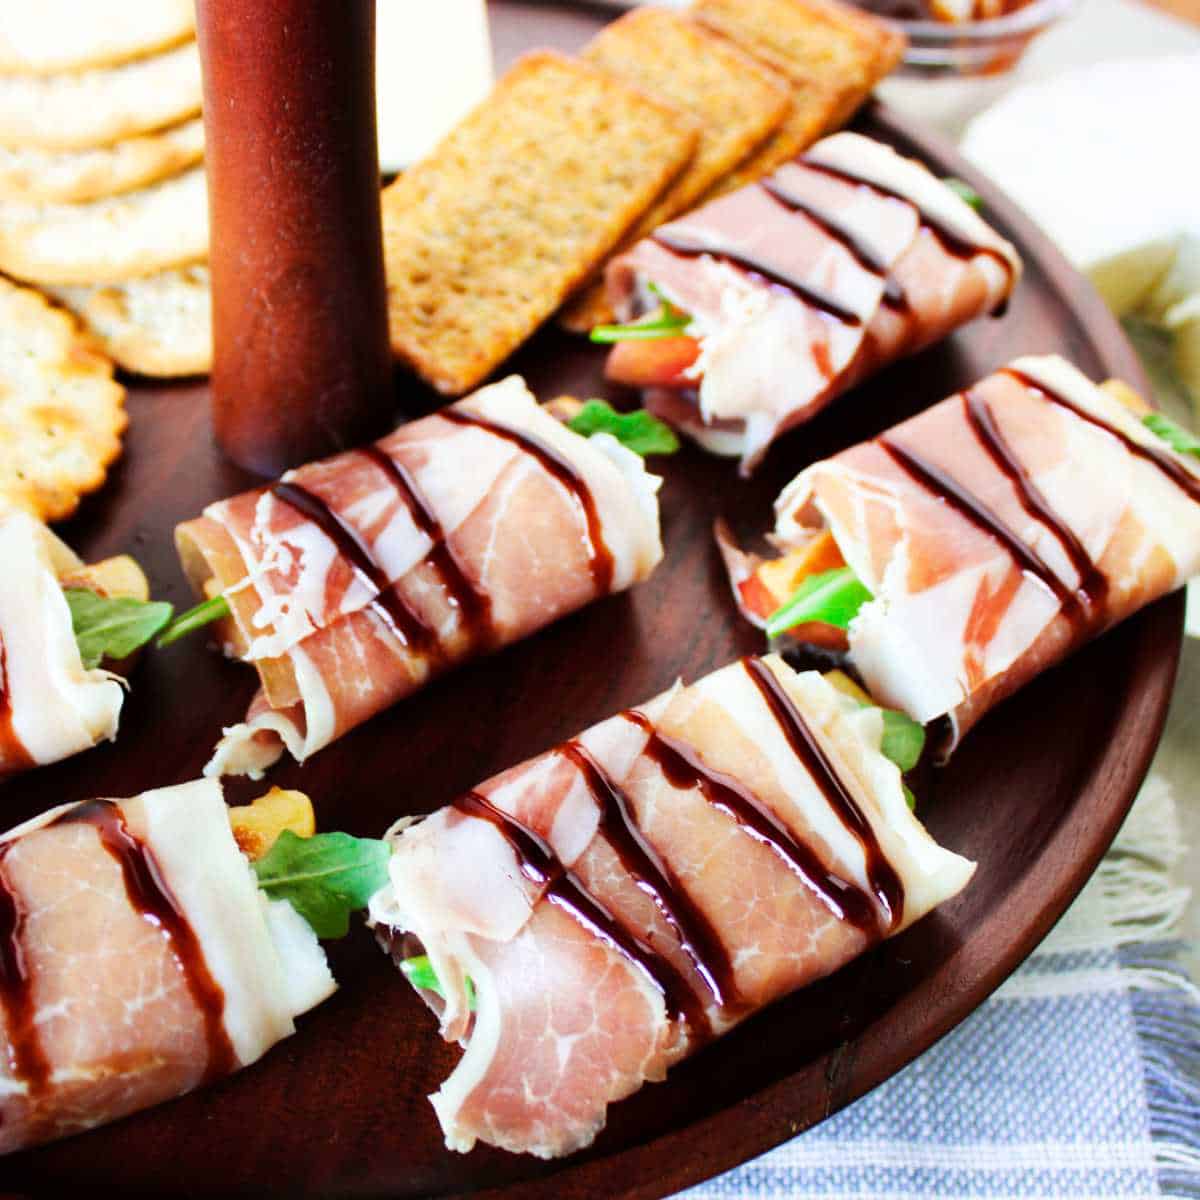 prosciutto wrapped bundles of apple and cheese drizzled with balsamic glaze.